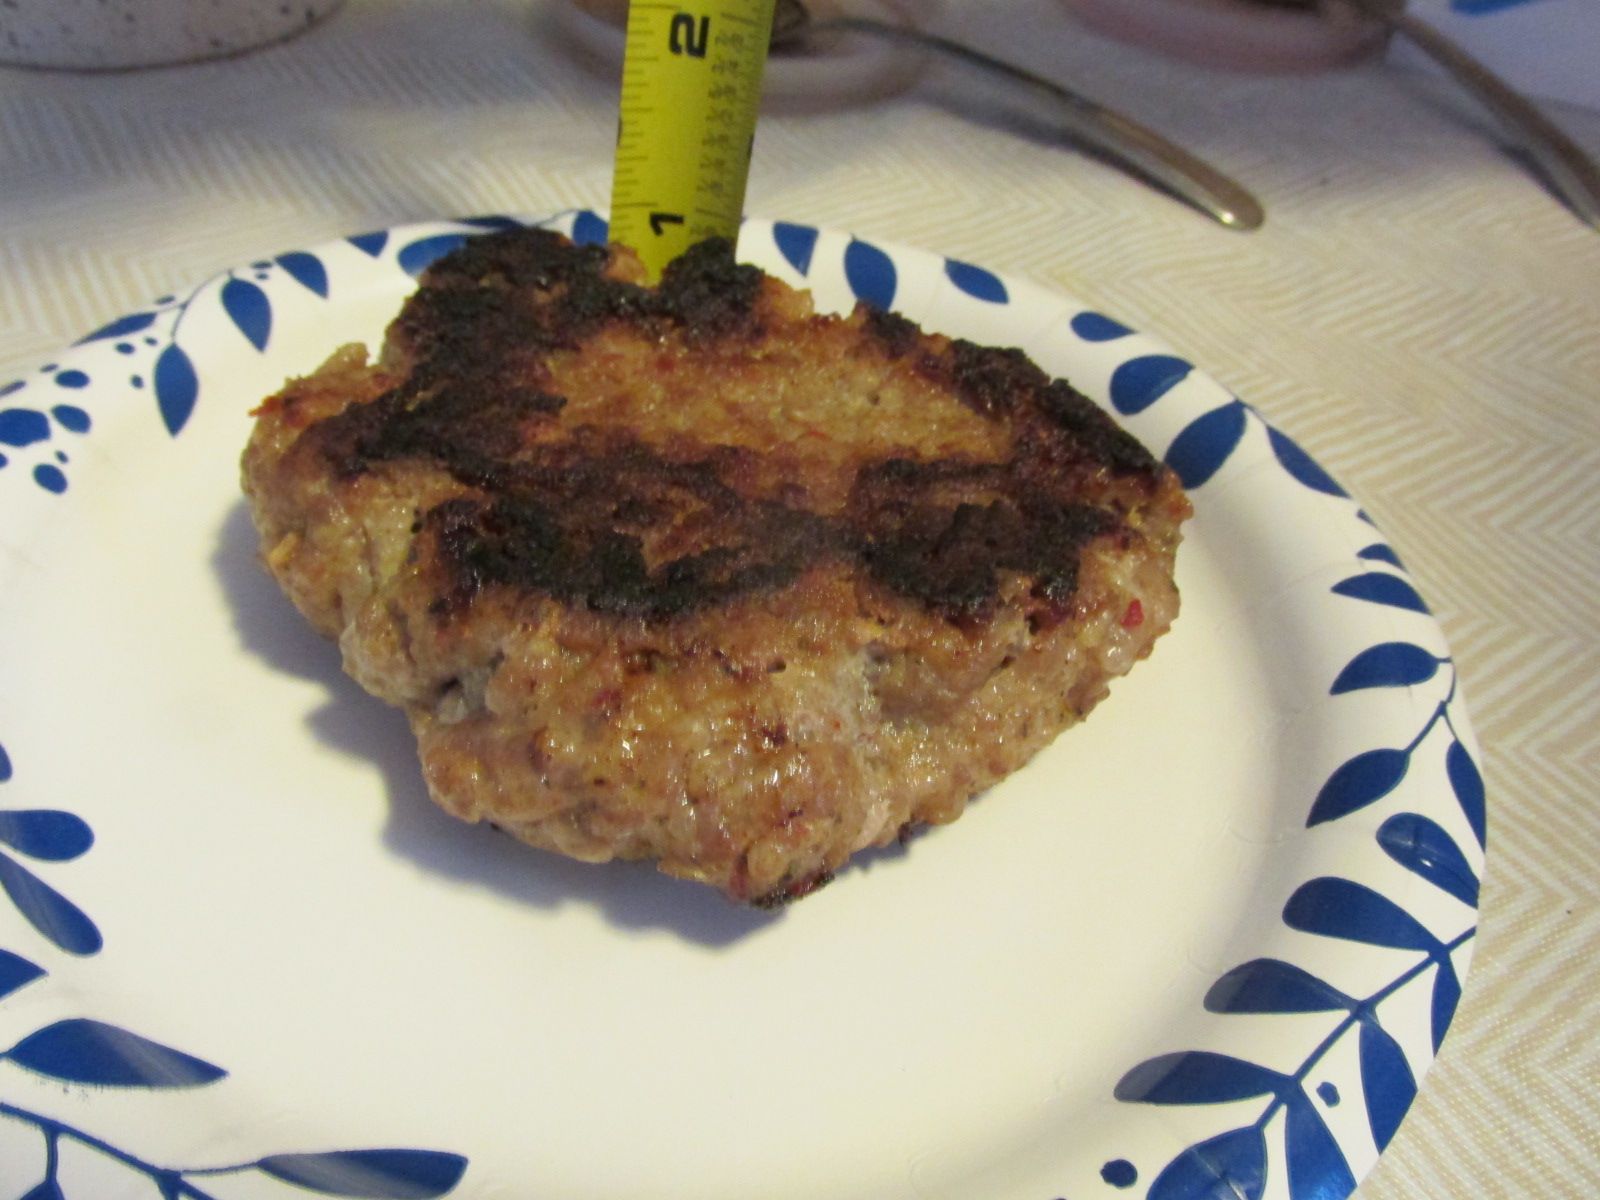 240221 003 cooked sausage pattty 002.jpg